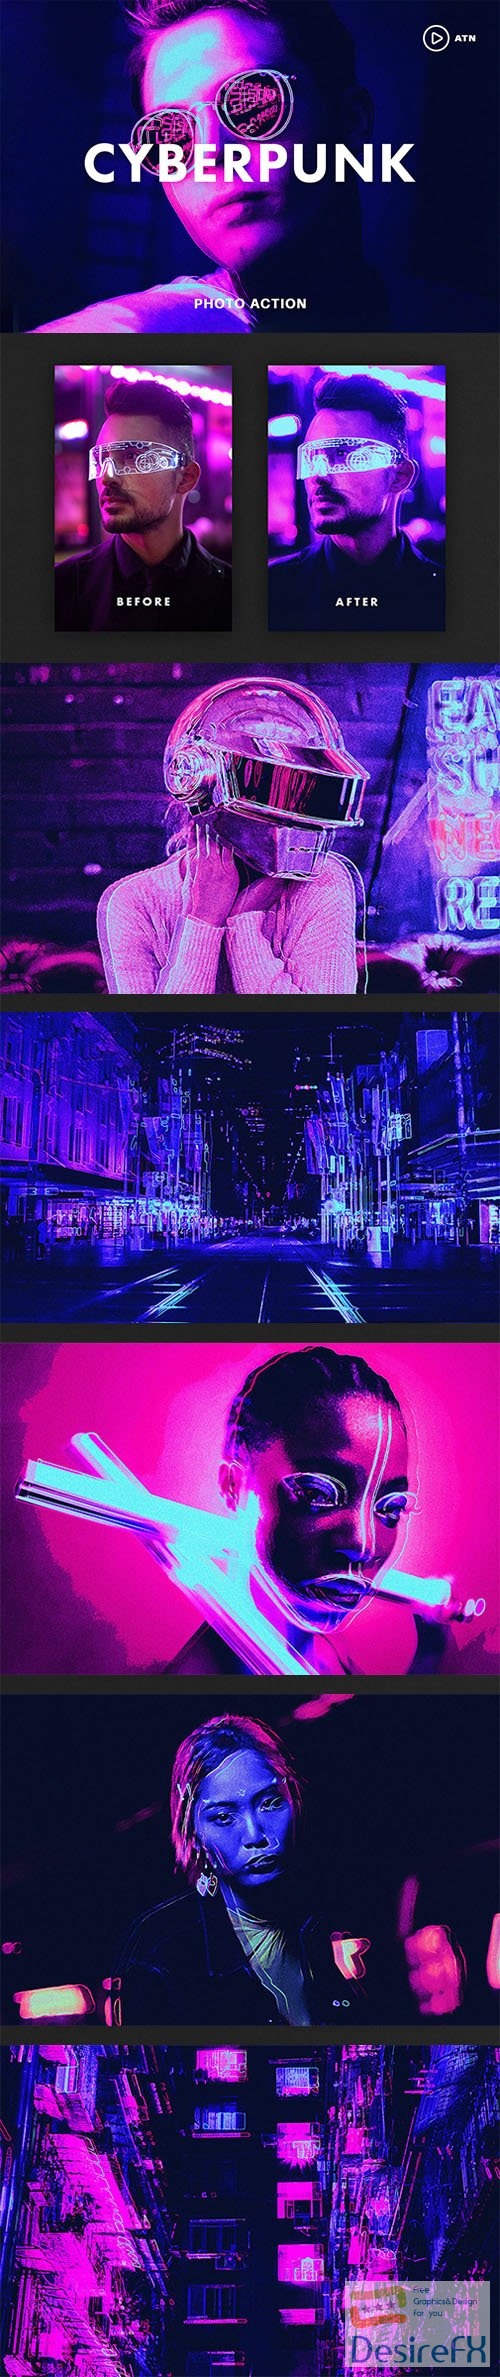 Cyberpunk Photo Actions & Gradients for Photoshop